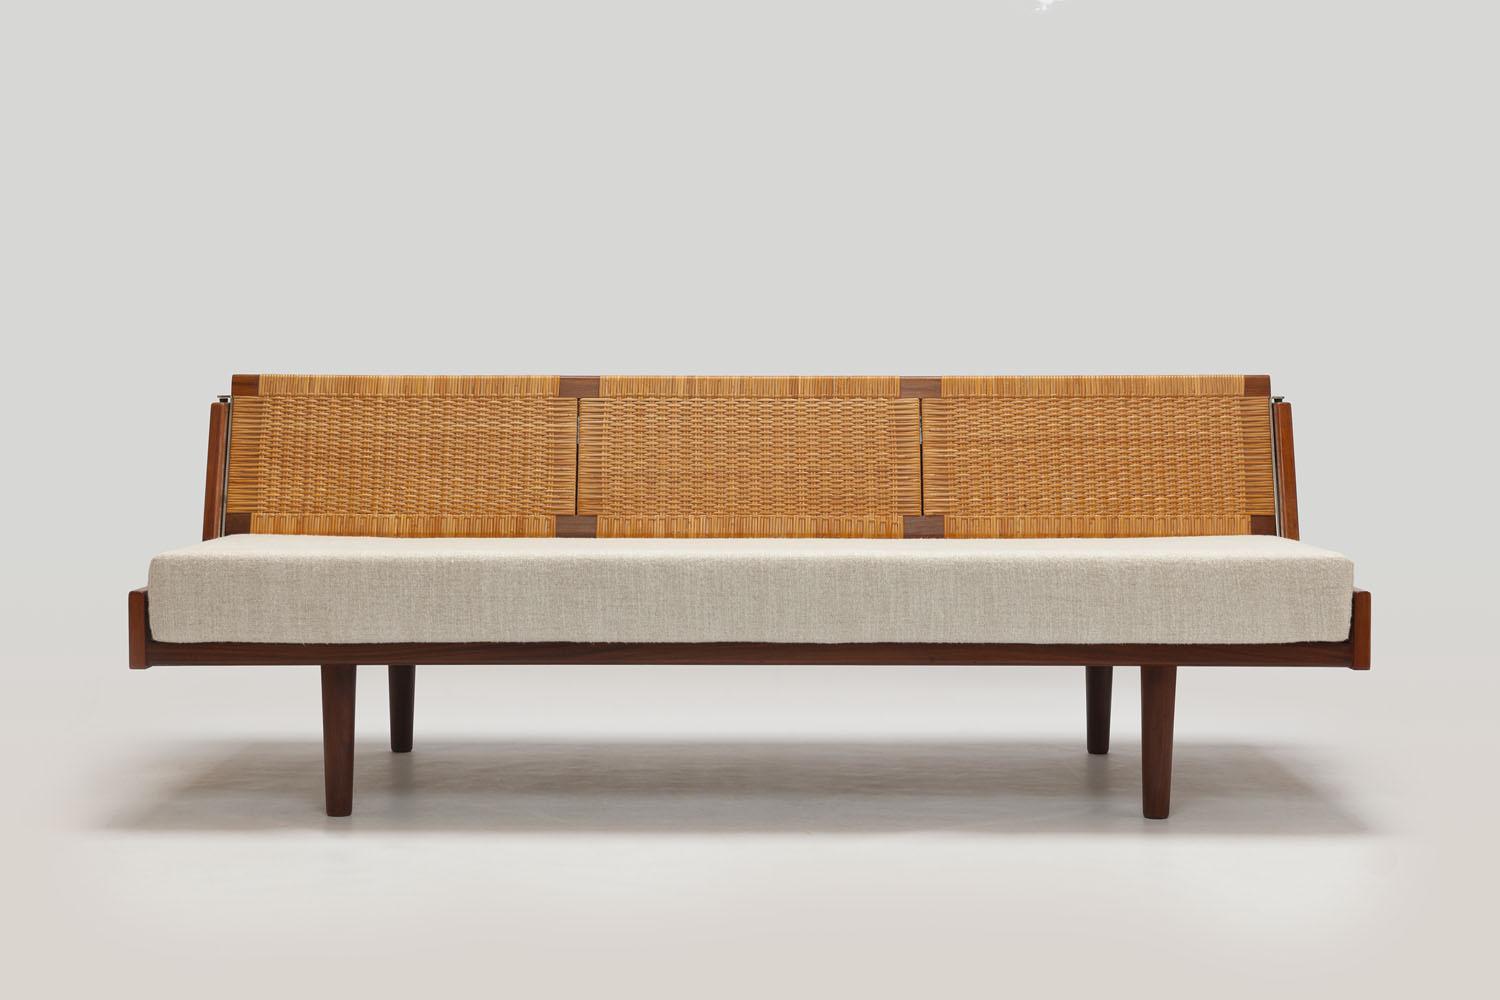 Sofa daybed model GE-7 by Hans Wegner, designed in 1954, manufactured by Getama Denmark.
This version with a woven wicker backrest is an early and very rare version of the popular sofa-daybed design that Wegner designed in many versions for